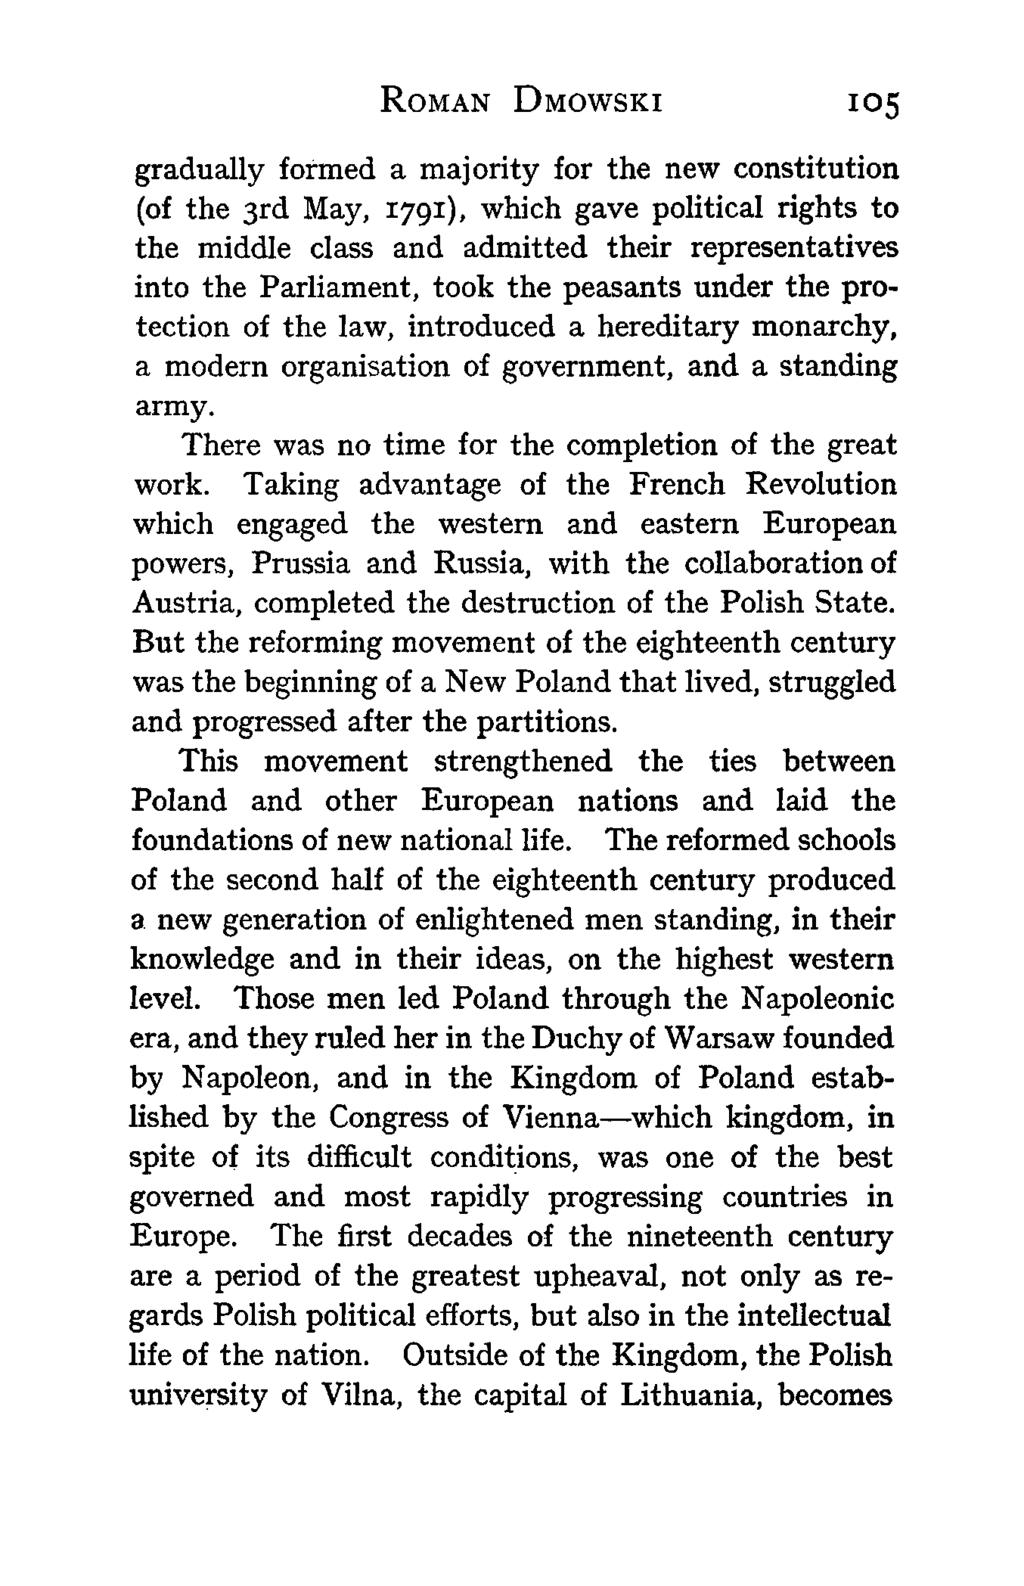 ROMAN DMOWSKI 105 gradually formed a majority for the new constitution (of the 3rd May, 1791), which gave political rights to the middle class and admitted their representatives into the Parliament,